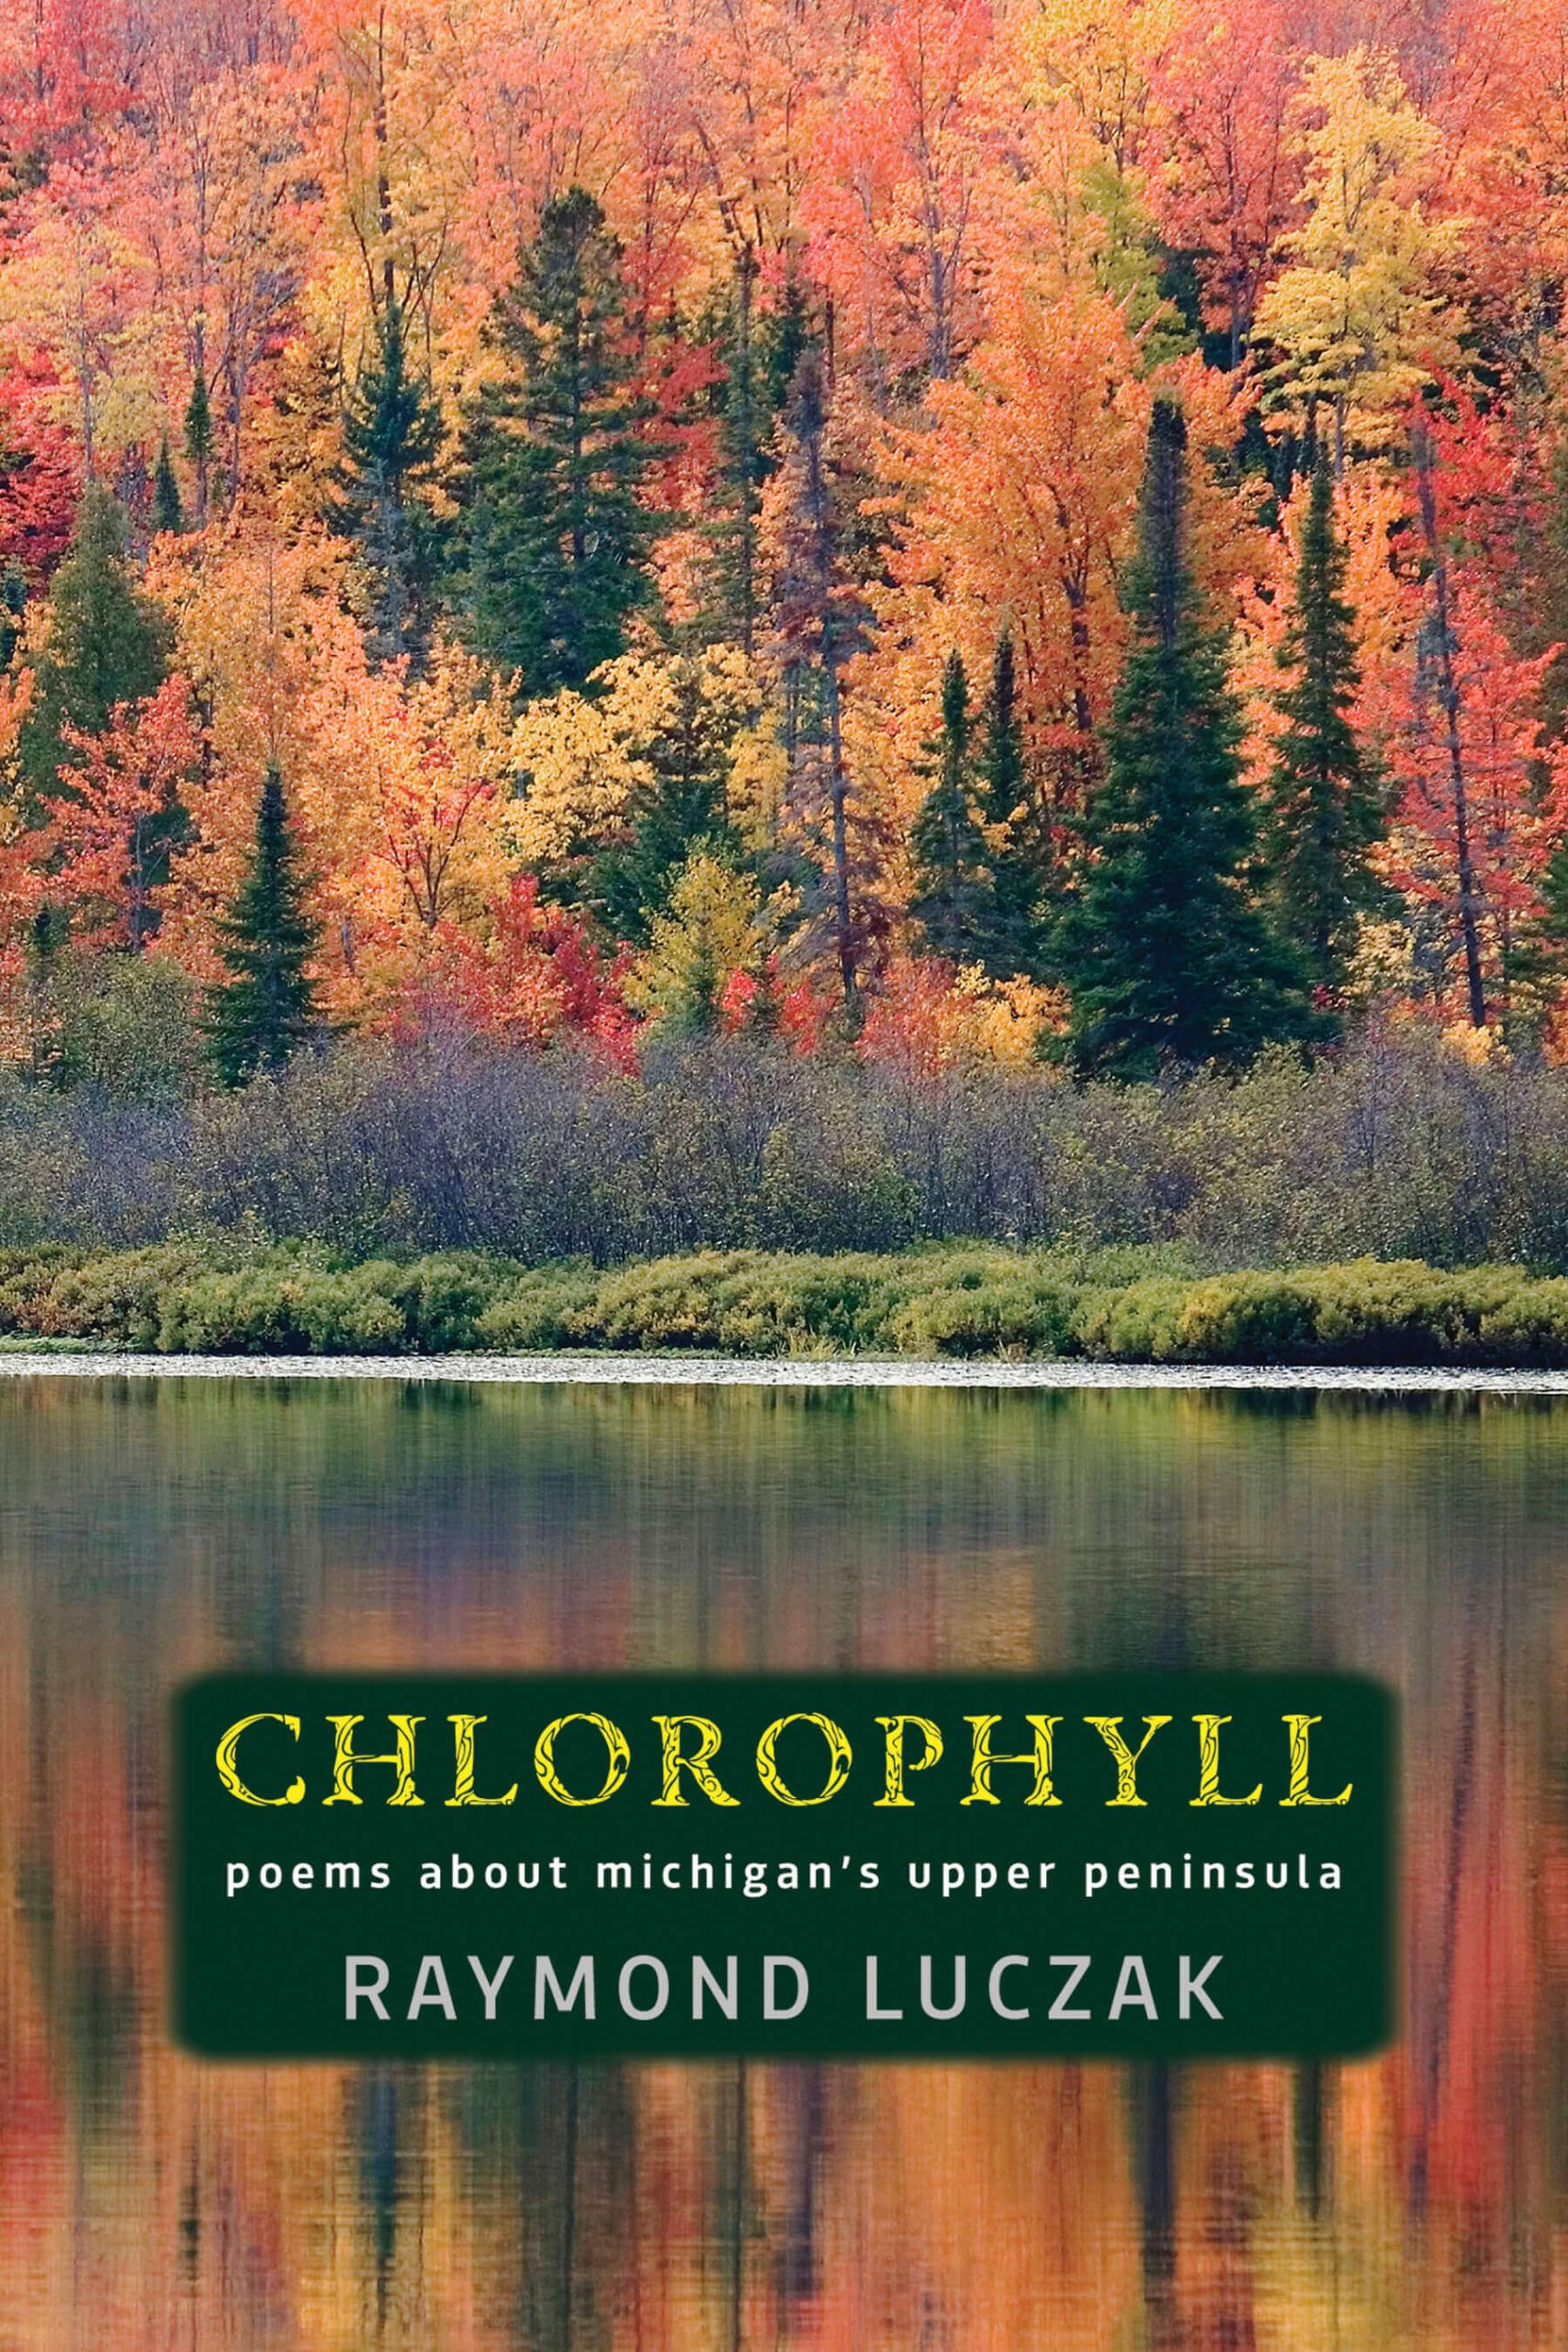 Chlorophyll: Poems about Michigan’s Upper Peninsula